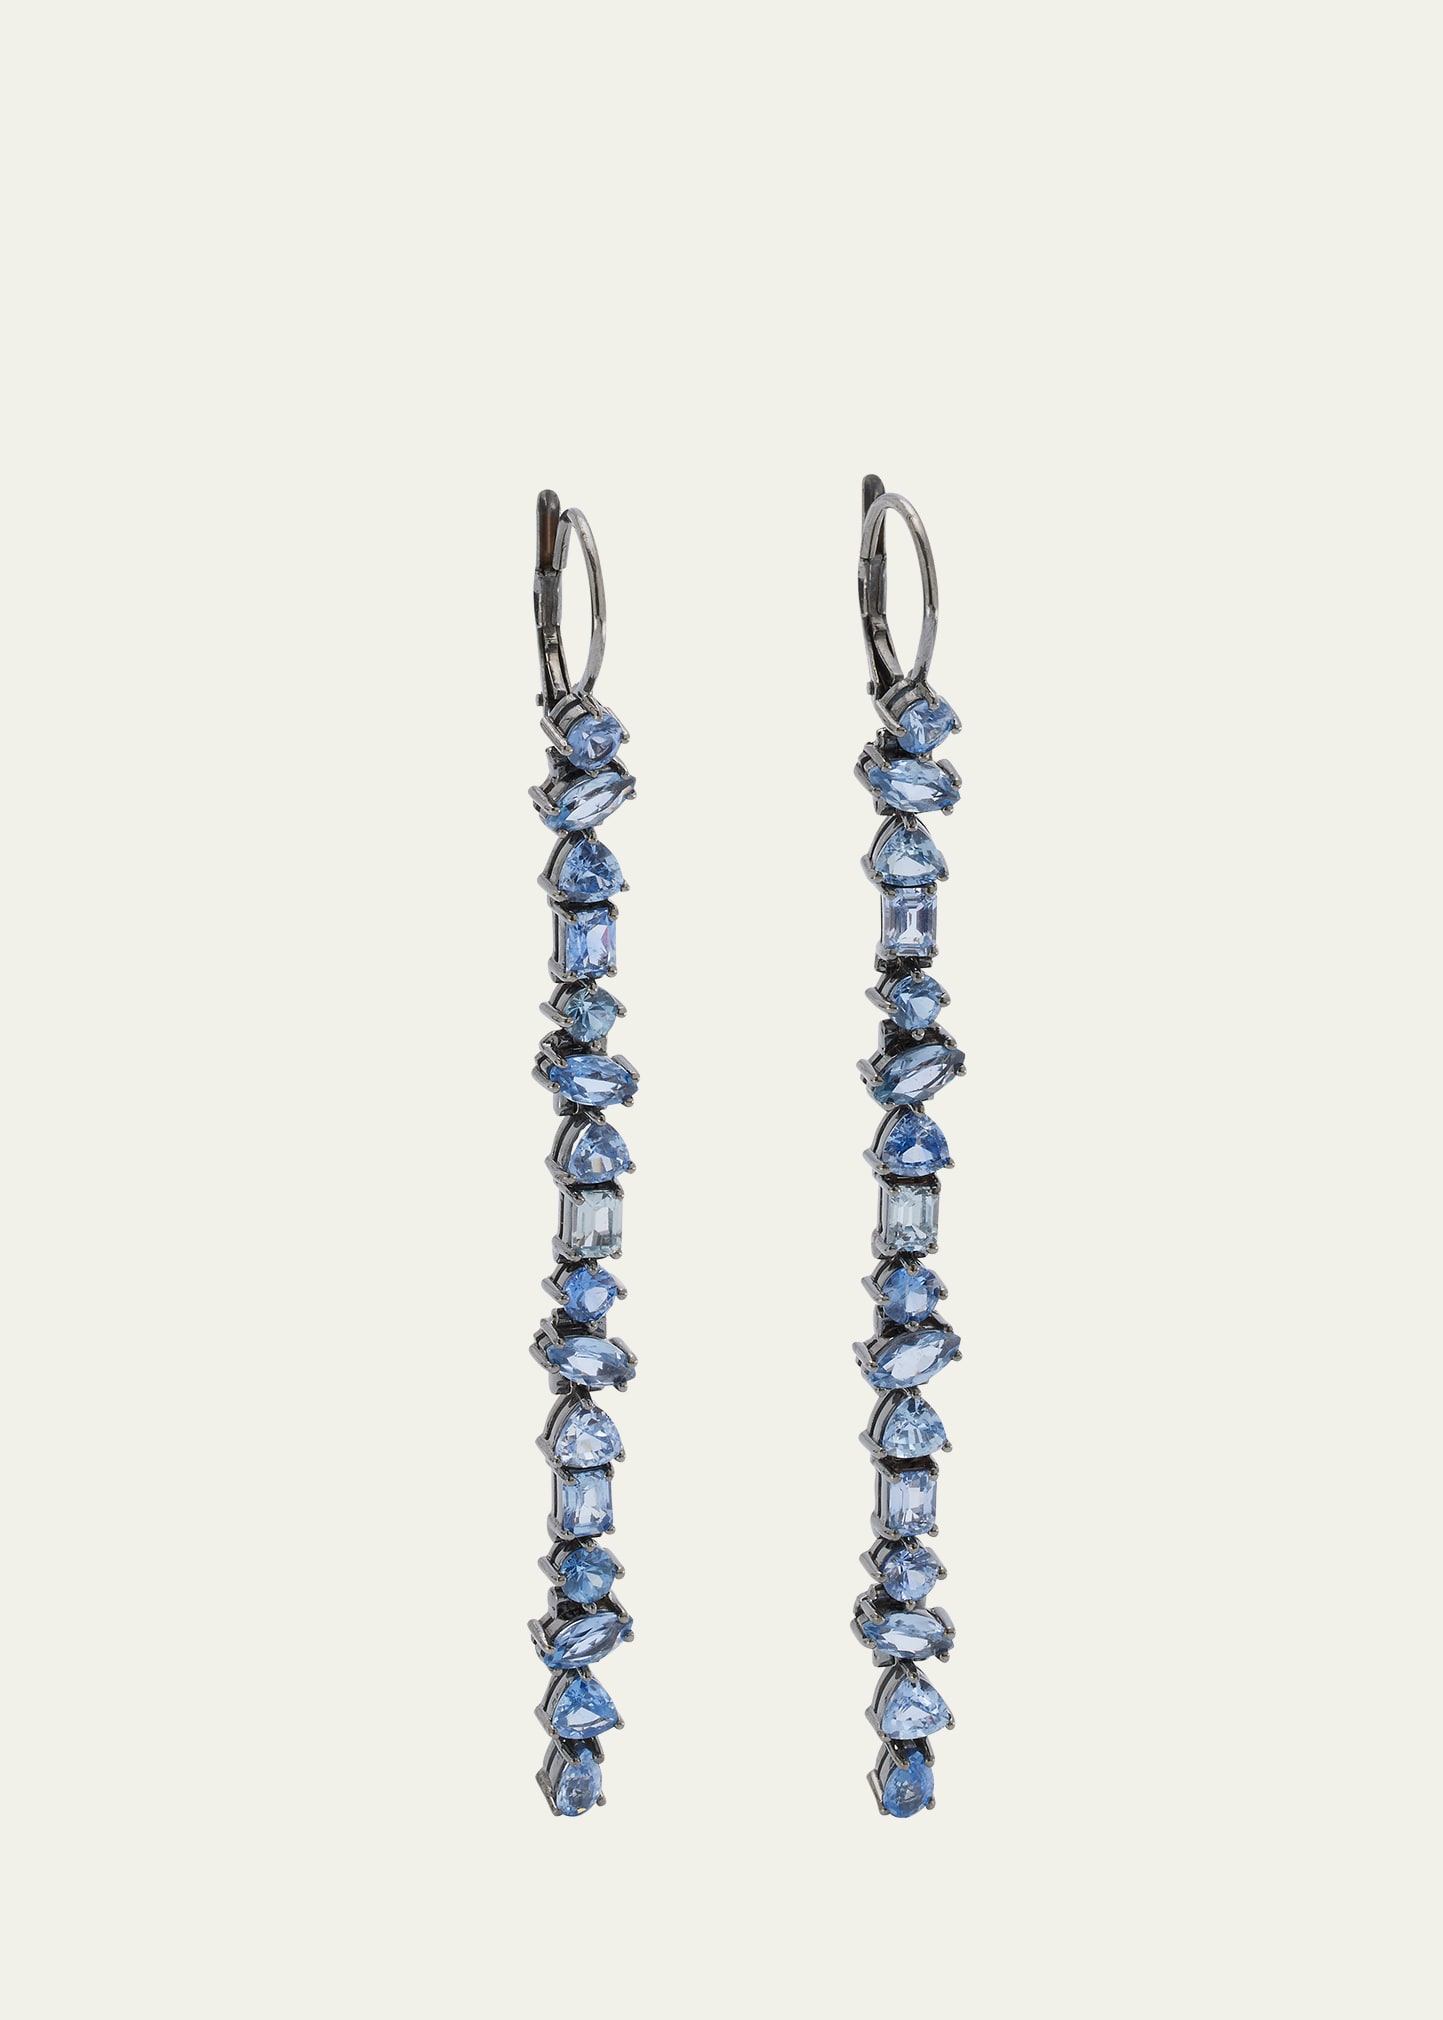 White Gold with Black Rhodium Earrings with Blue Sapphires